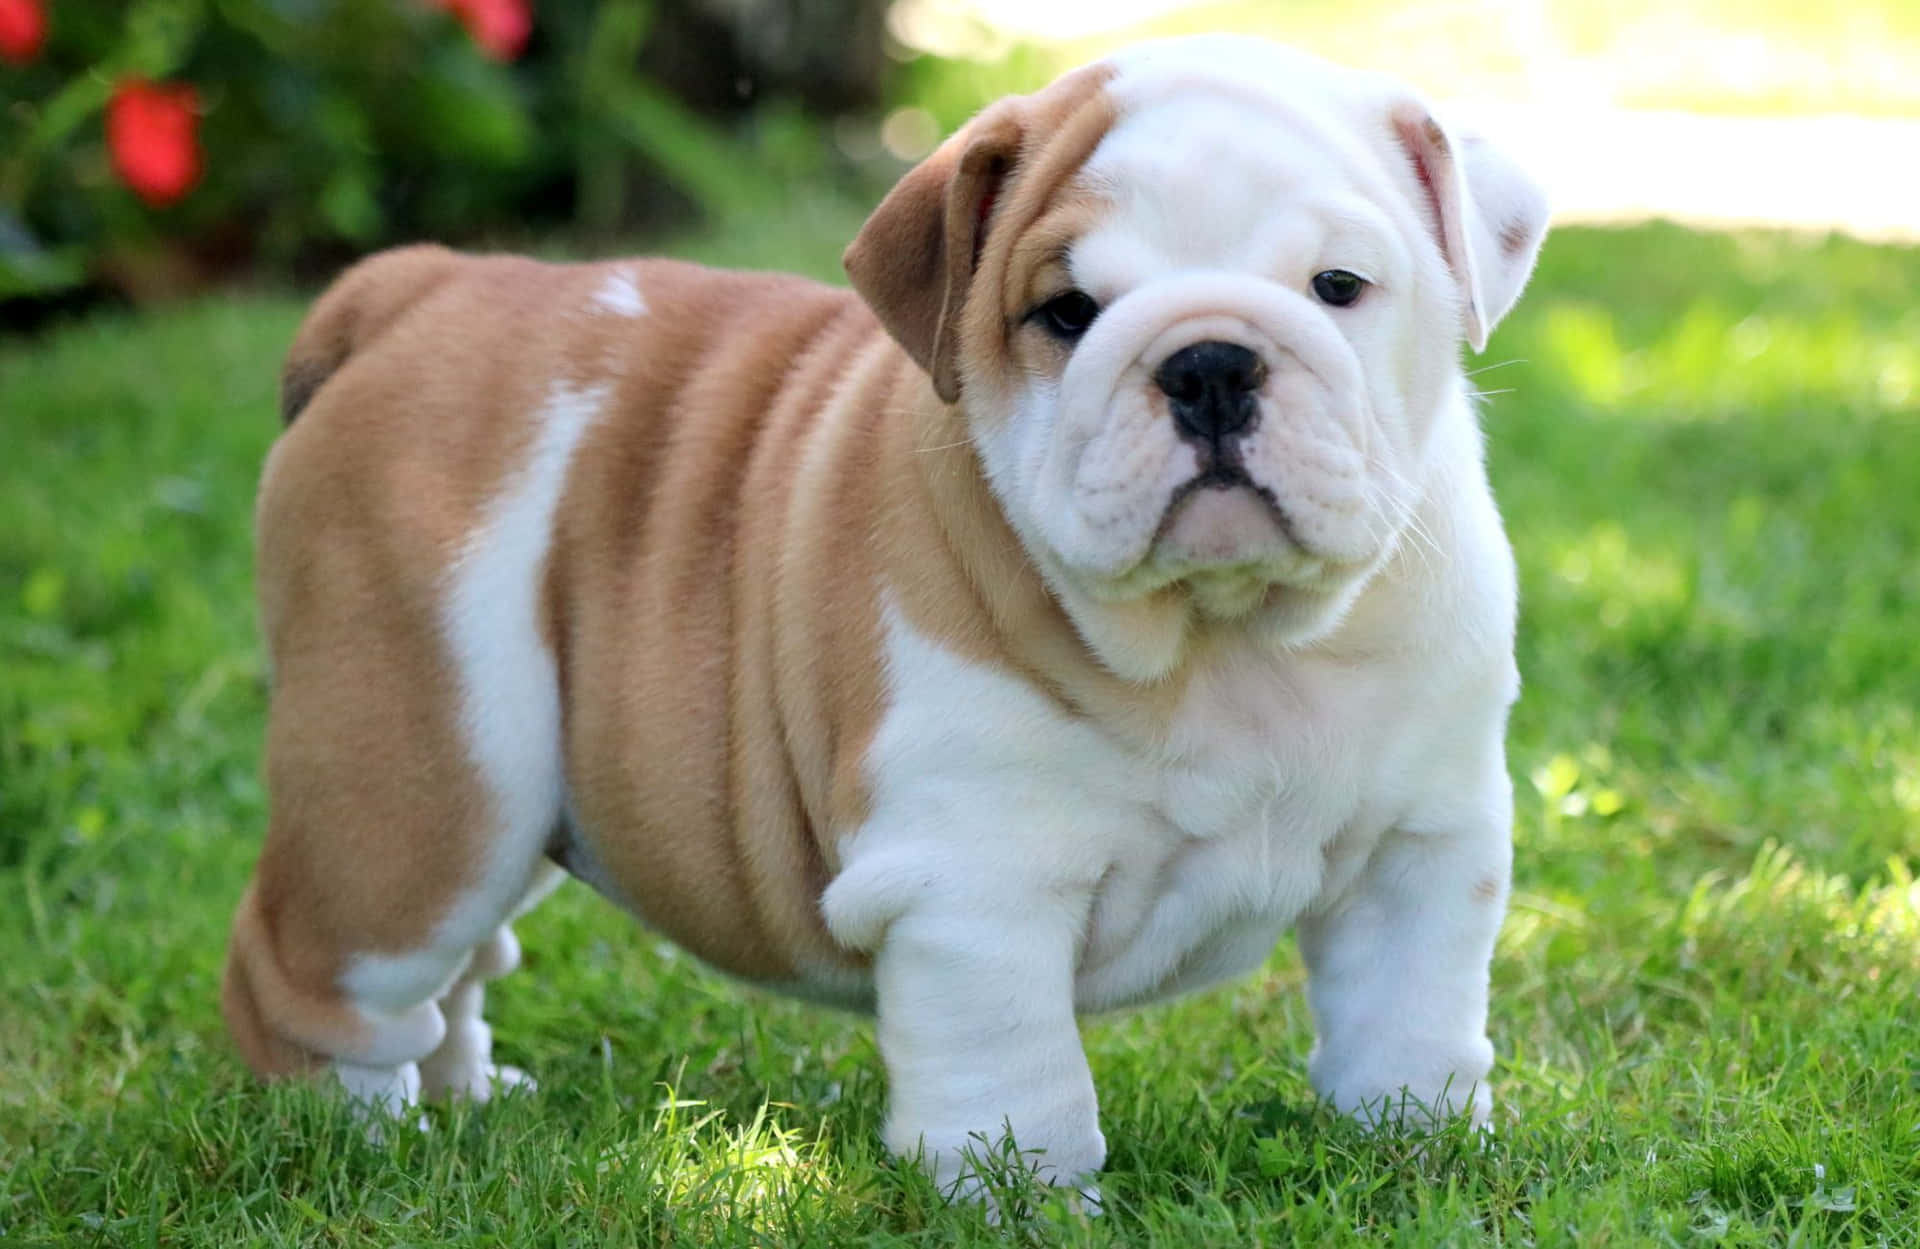 Chubby Adorable Puppy Bulldog Picture